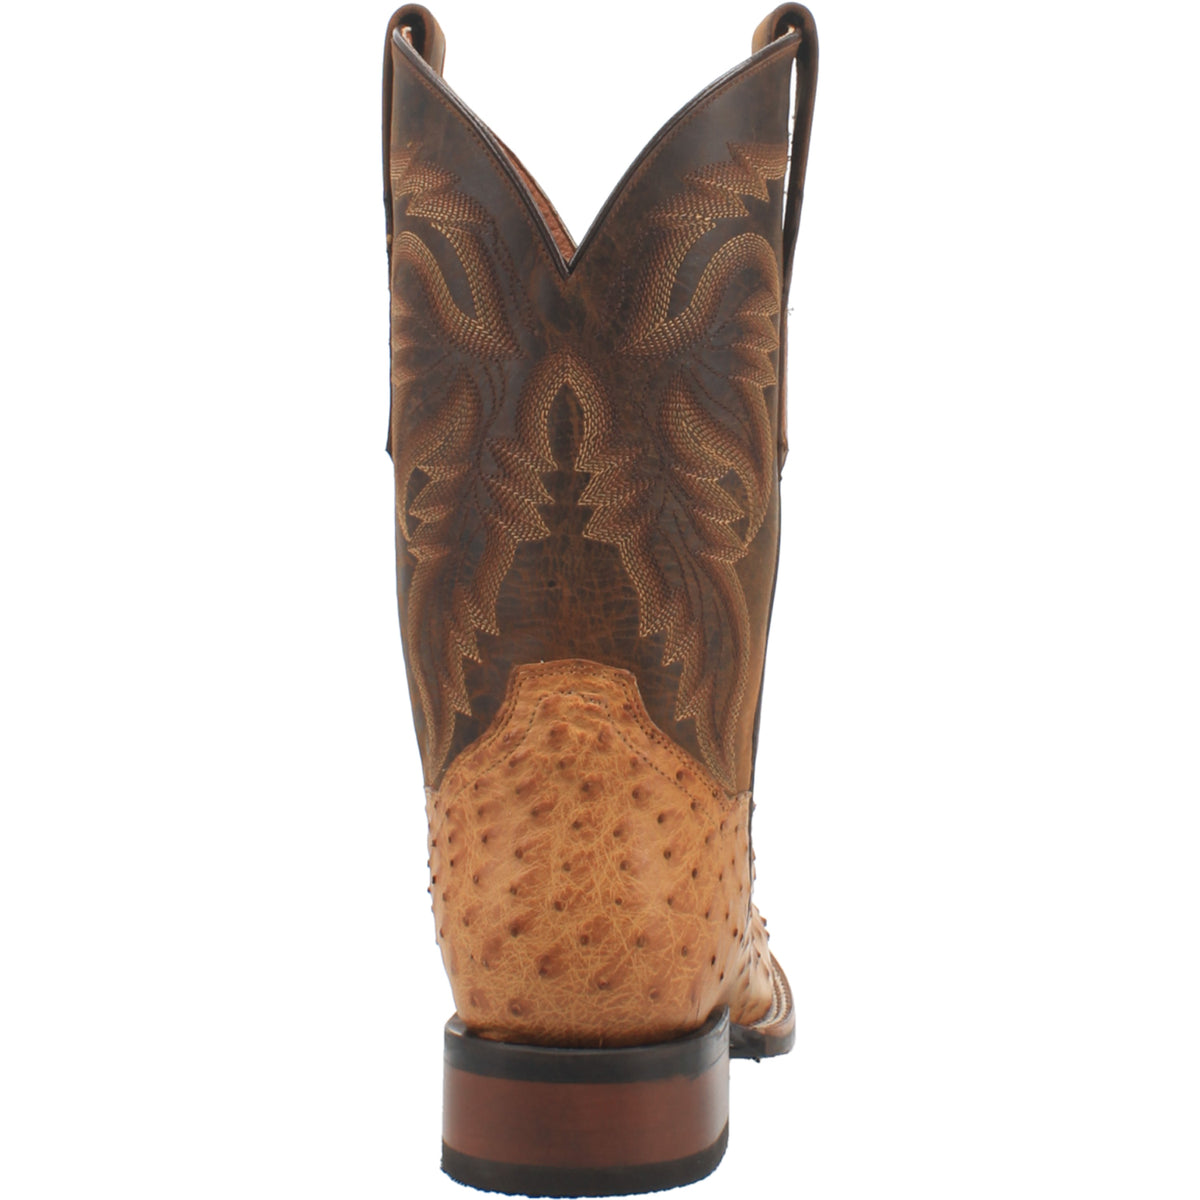 KERSHAW FULL QUILL OSTRICH BOOT Image